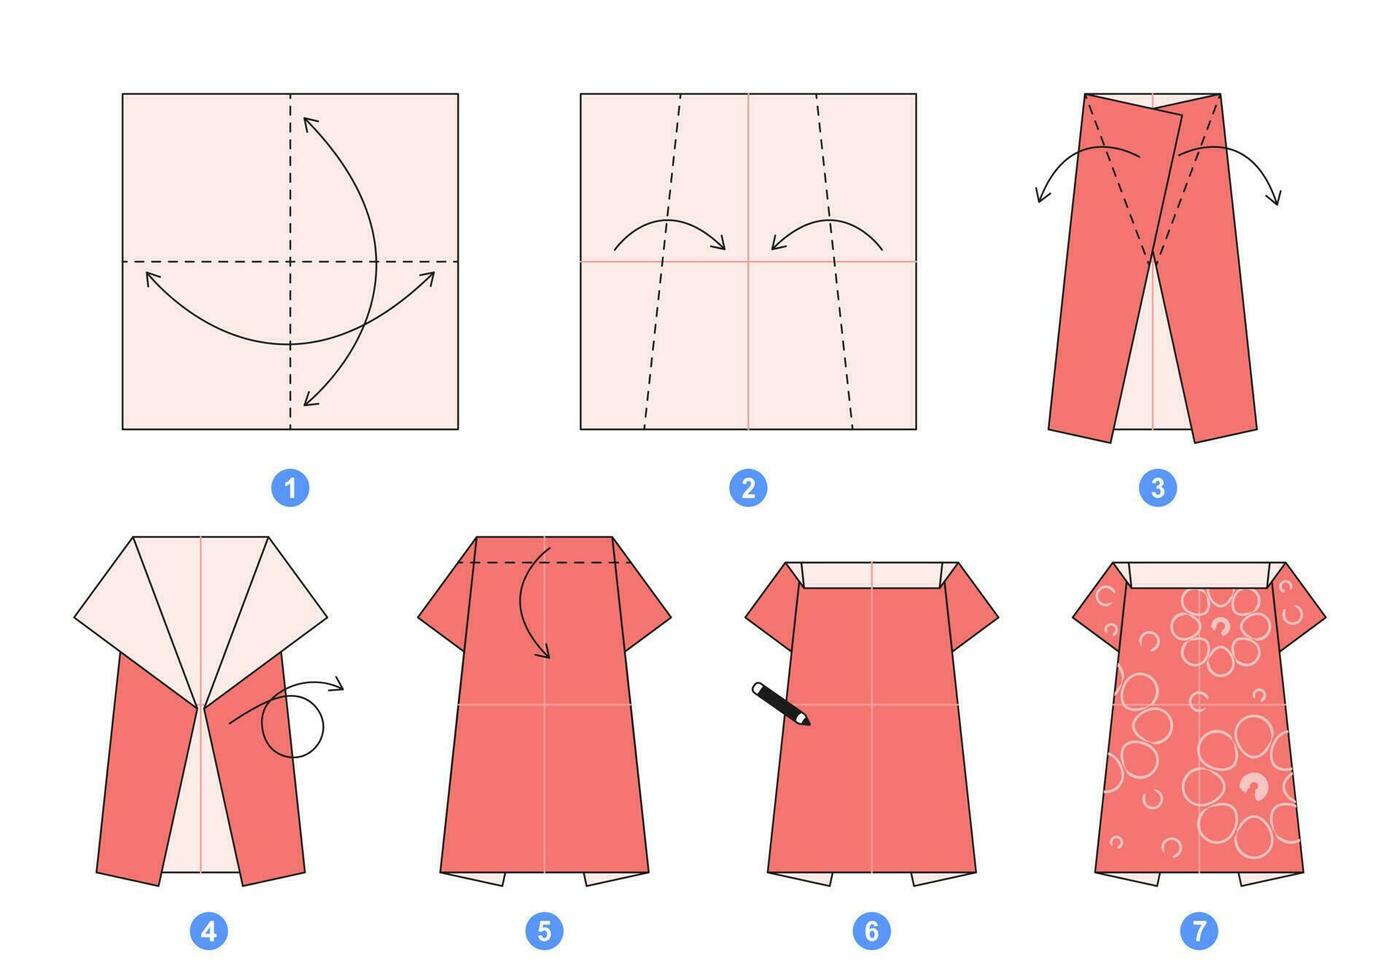 Dress origami scheme tutorial moving model. Origami for kids. Step by step how to make a cute origami cloth for women. Vector illustration.